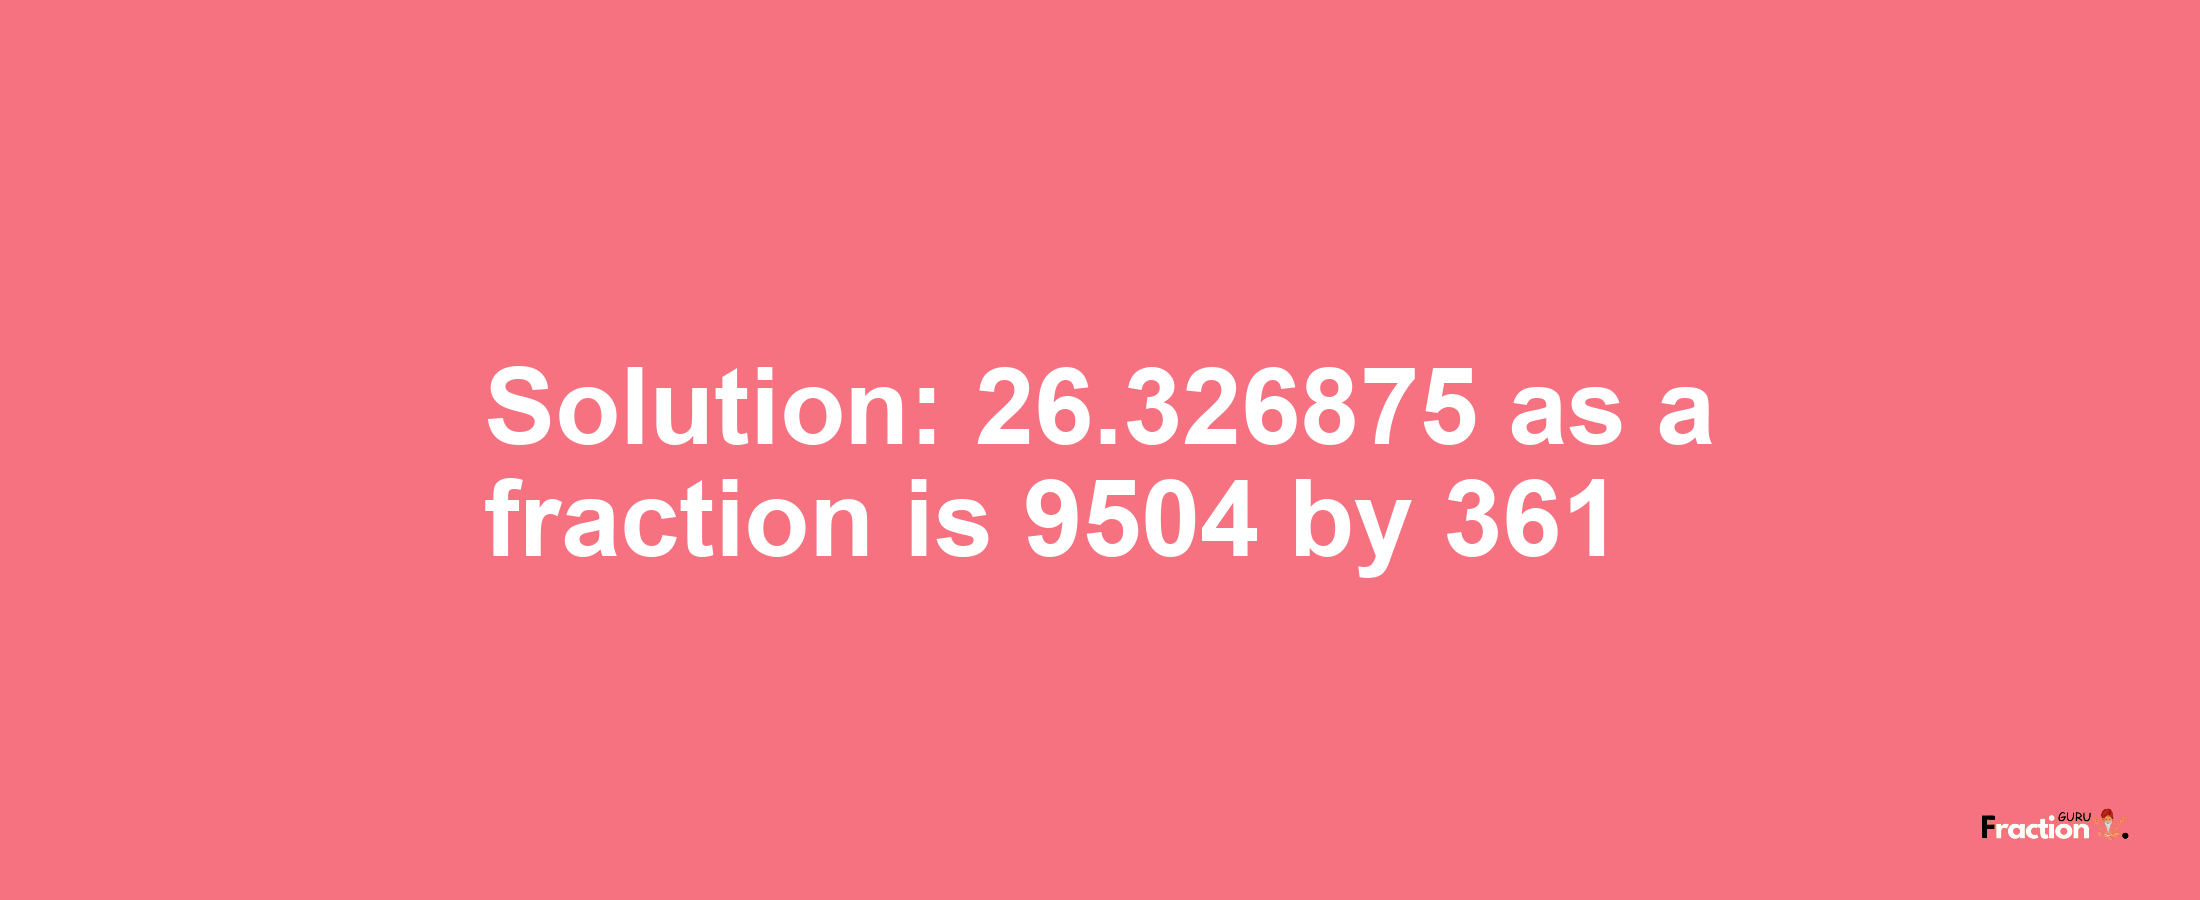 Solution:26.326875 as a fraction is 9504/361